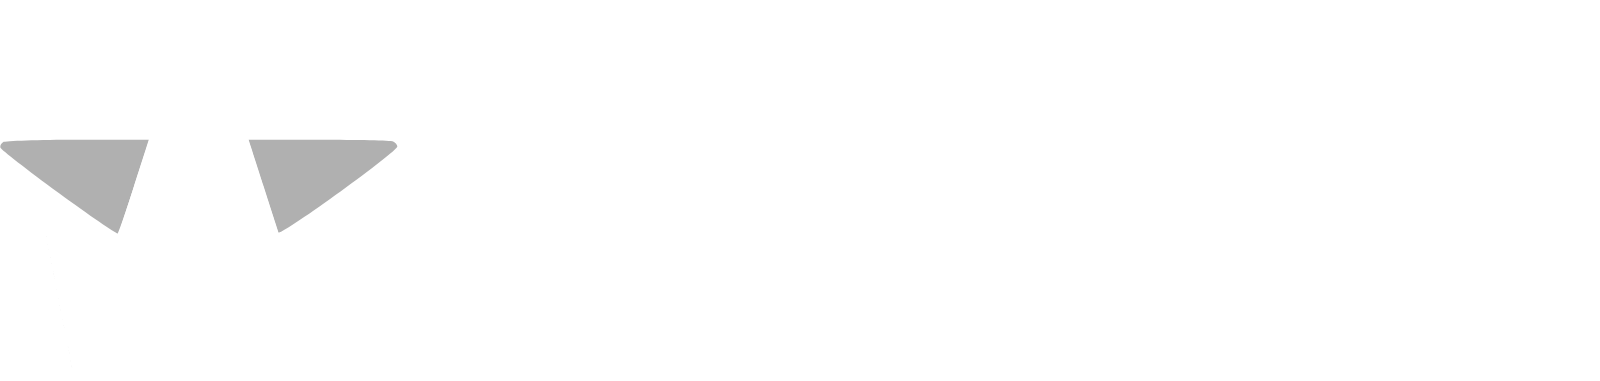 Astra Space logo large for dark backgrounds (transparent PNG)